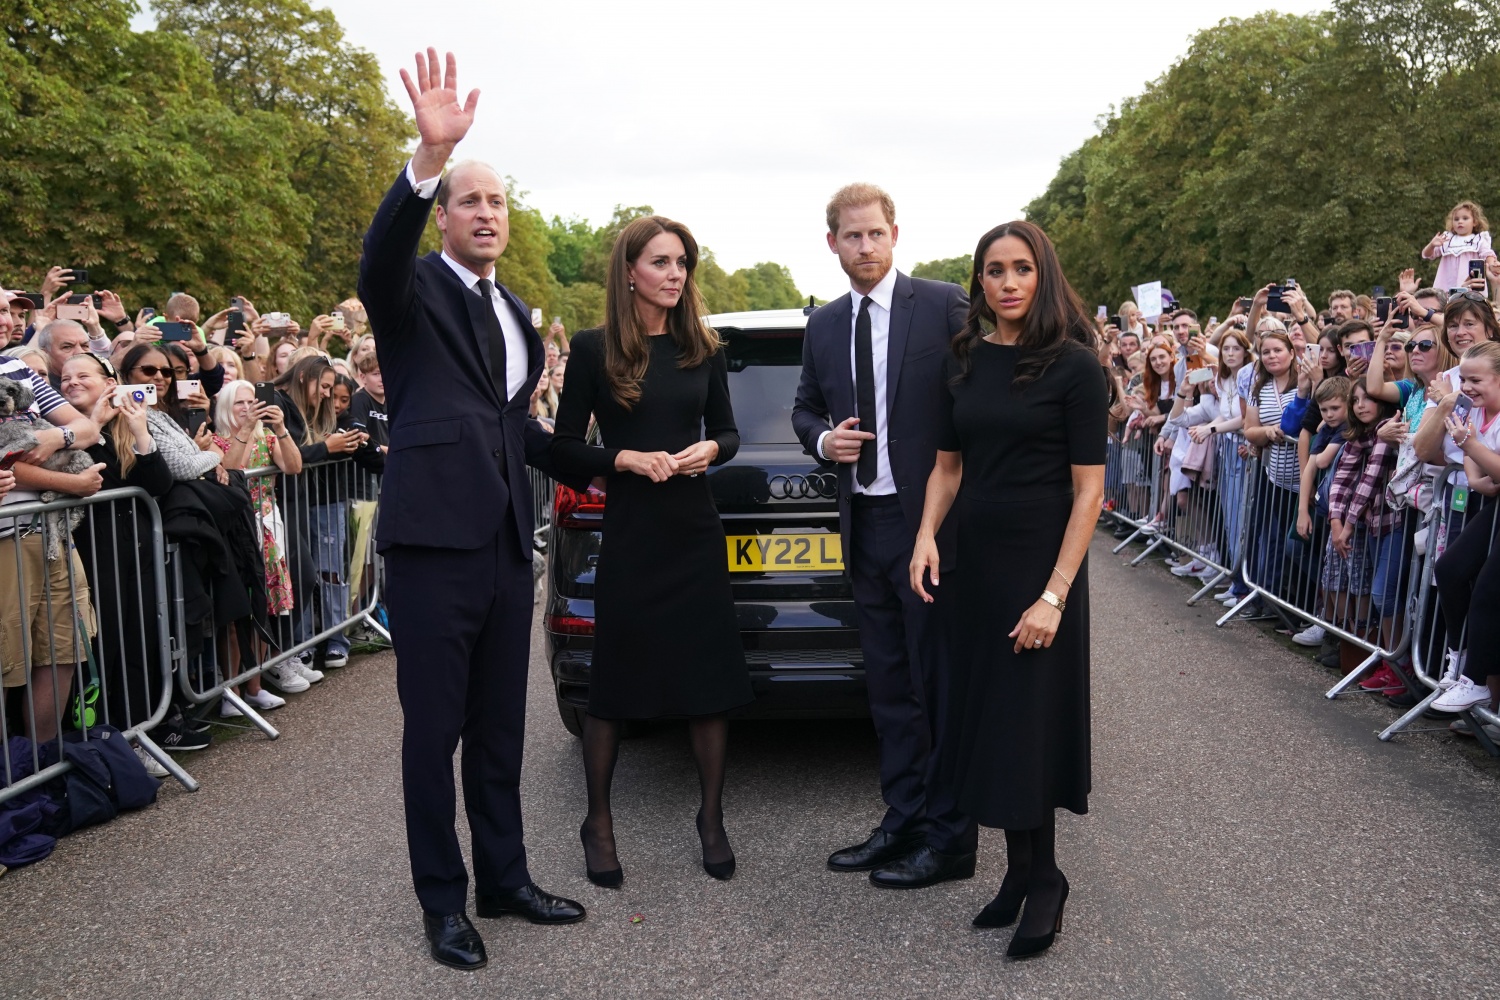 Kate Middleton Catherine, Princess of Wales, Prince William, Prince of Wales, Prince Harry, Duke of Sussex, and Meghan Markle, Duchess of Sussex 